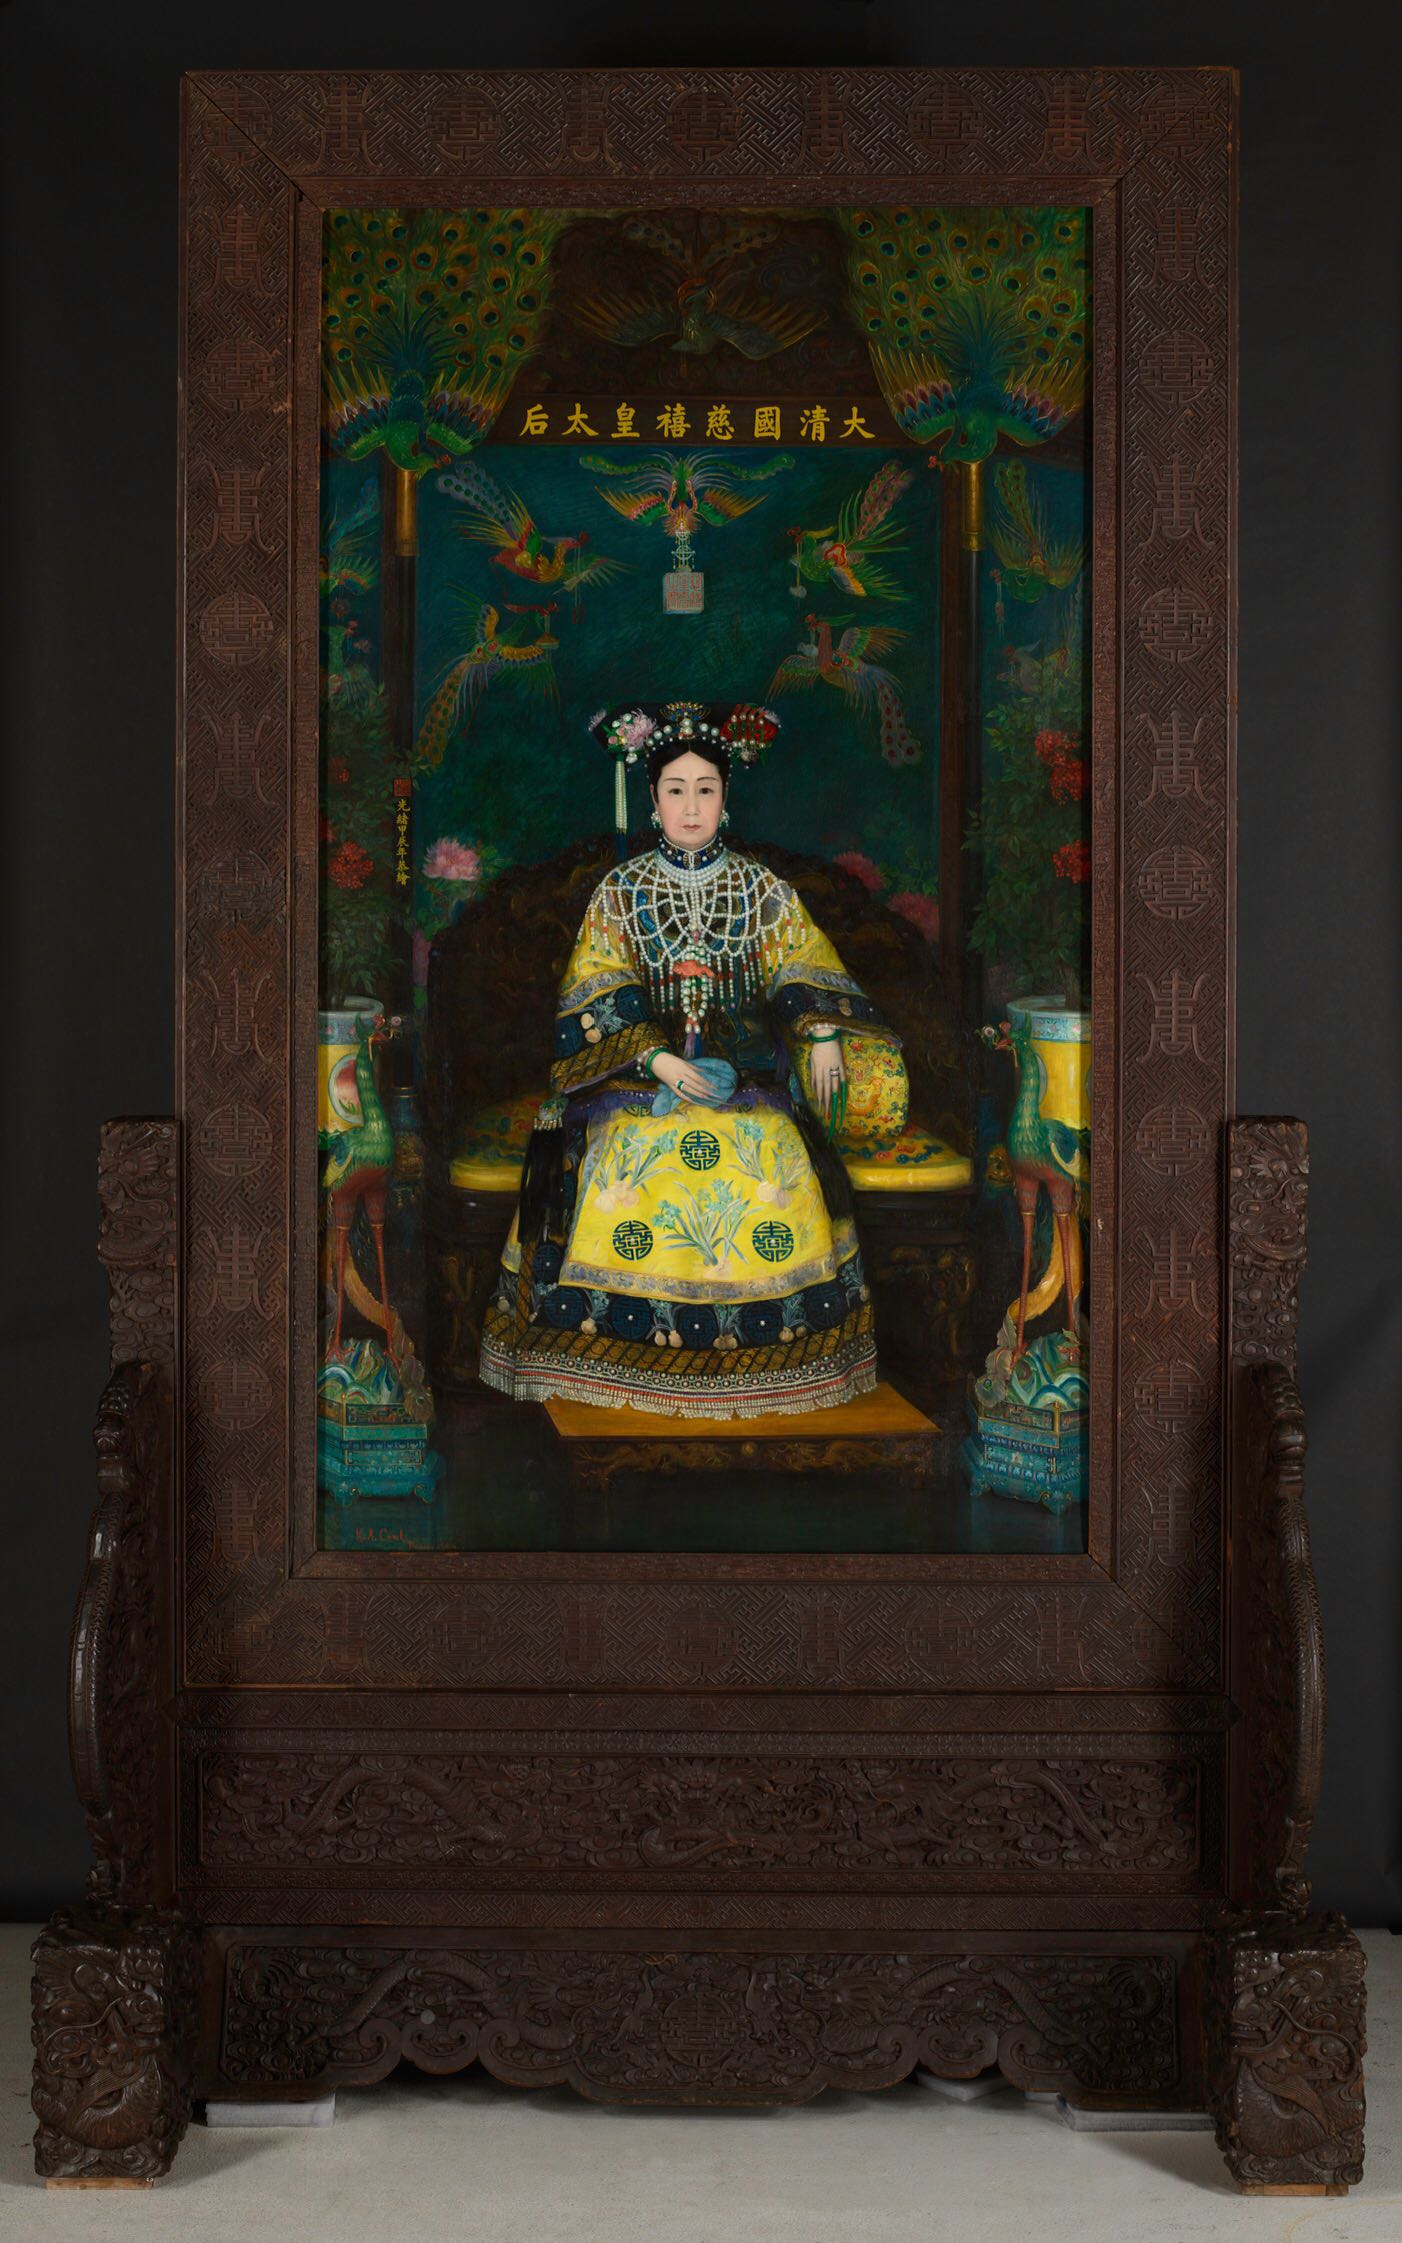 L'Impératrice Dowager, Tze Hsi, de Chine by Katharine Carl - 1903 - 297.2 × 173.4 cm 